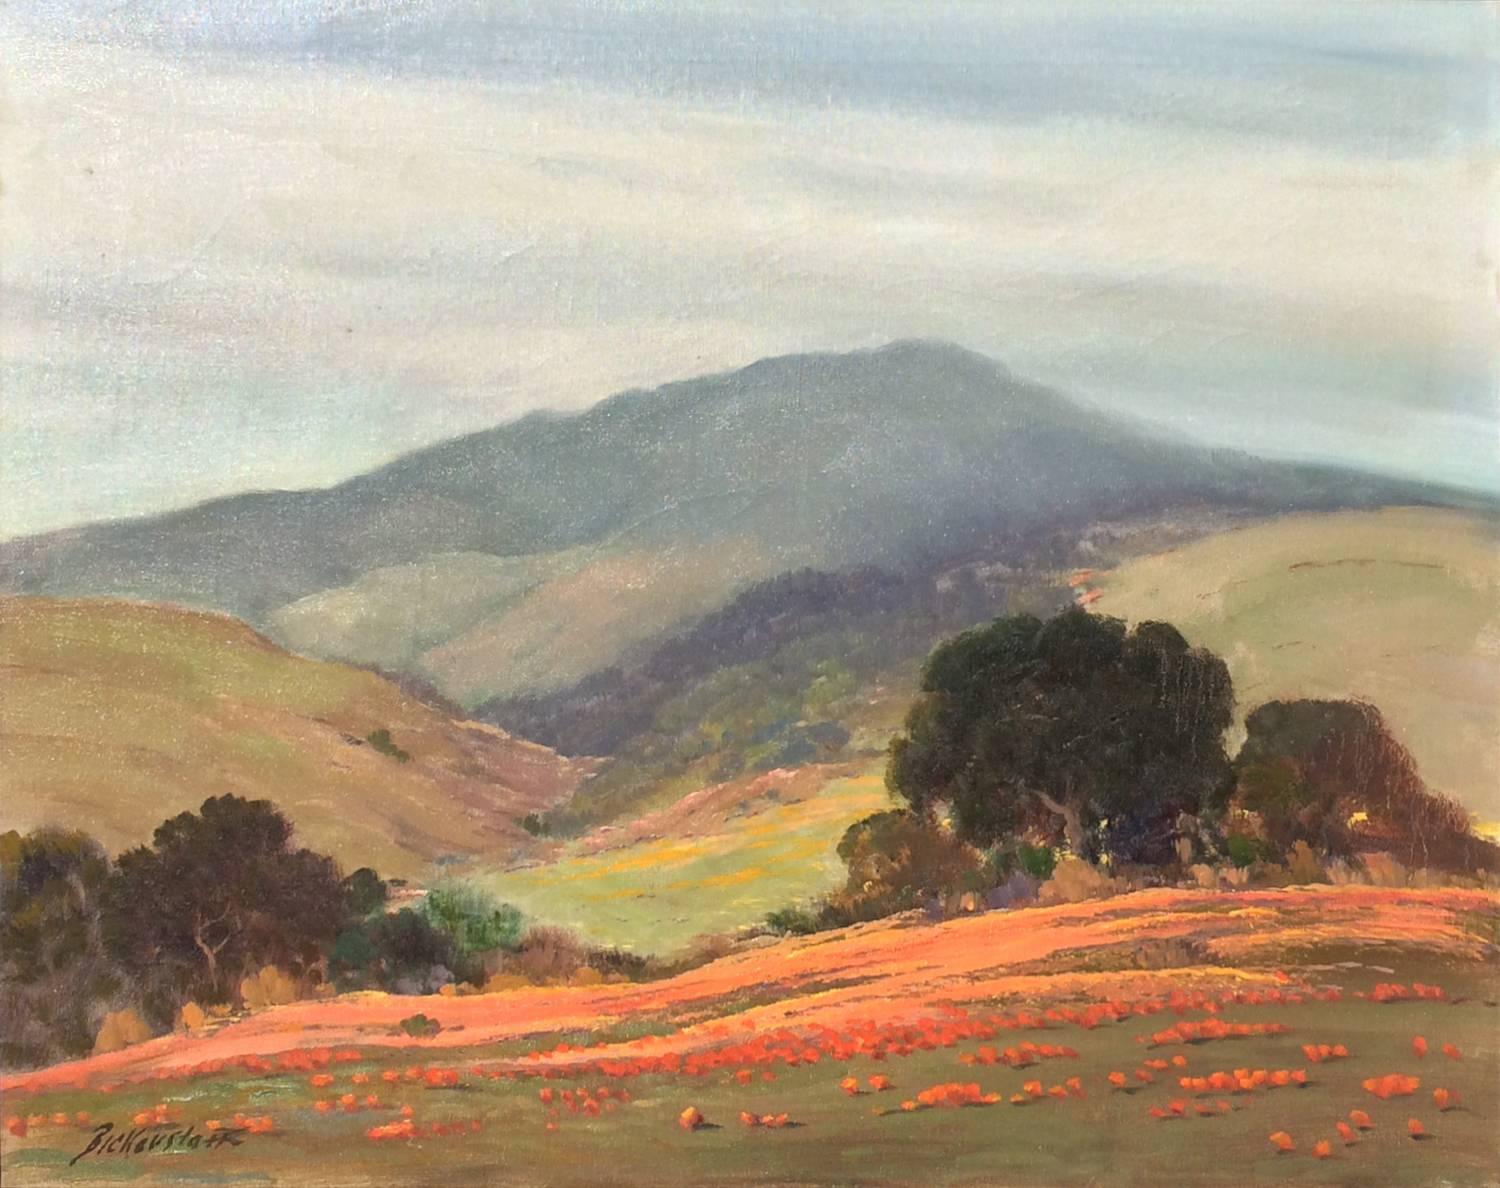 Untitled (California Landscape with Oaks and Poppies) - Painting by George Sanders Bickerstaff